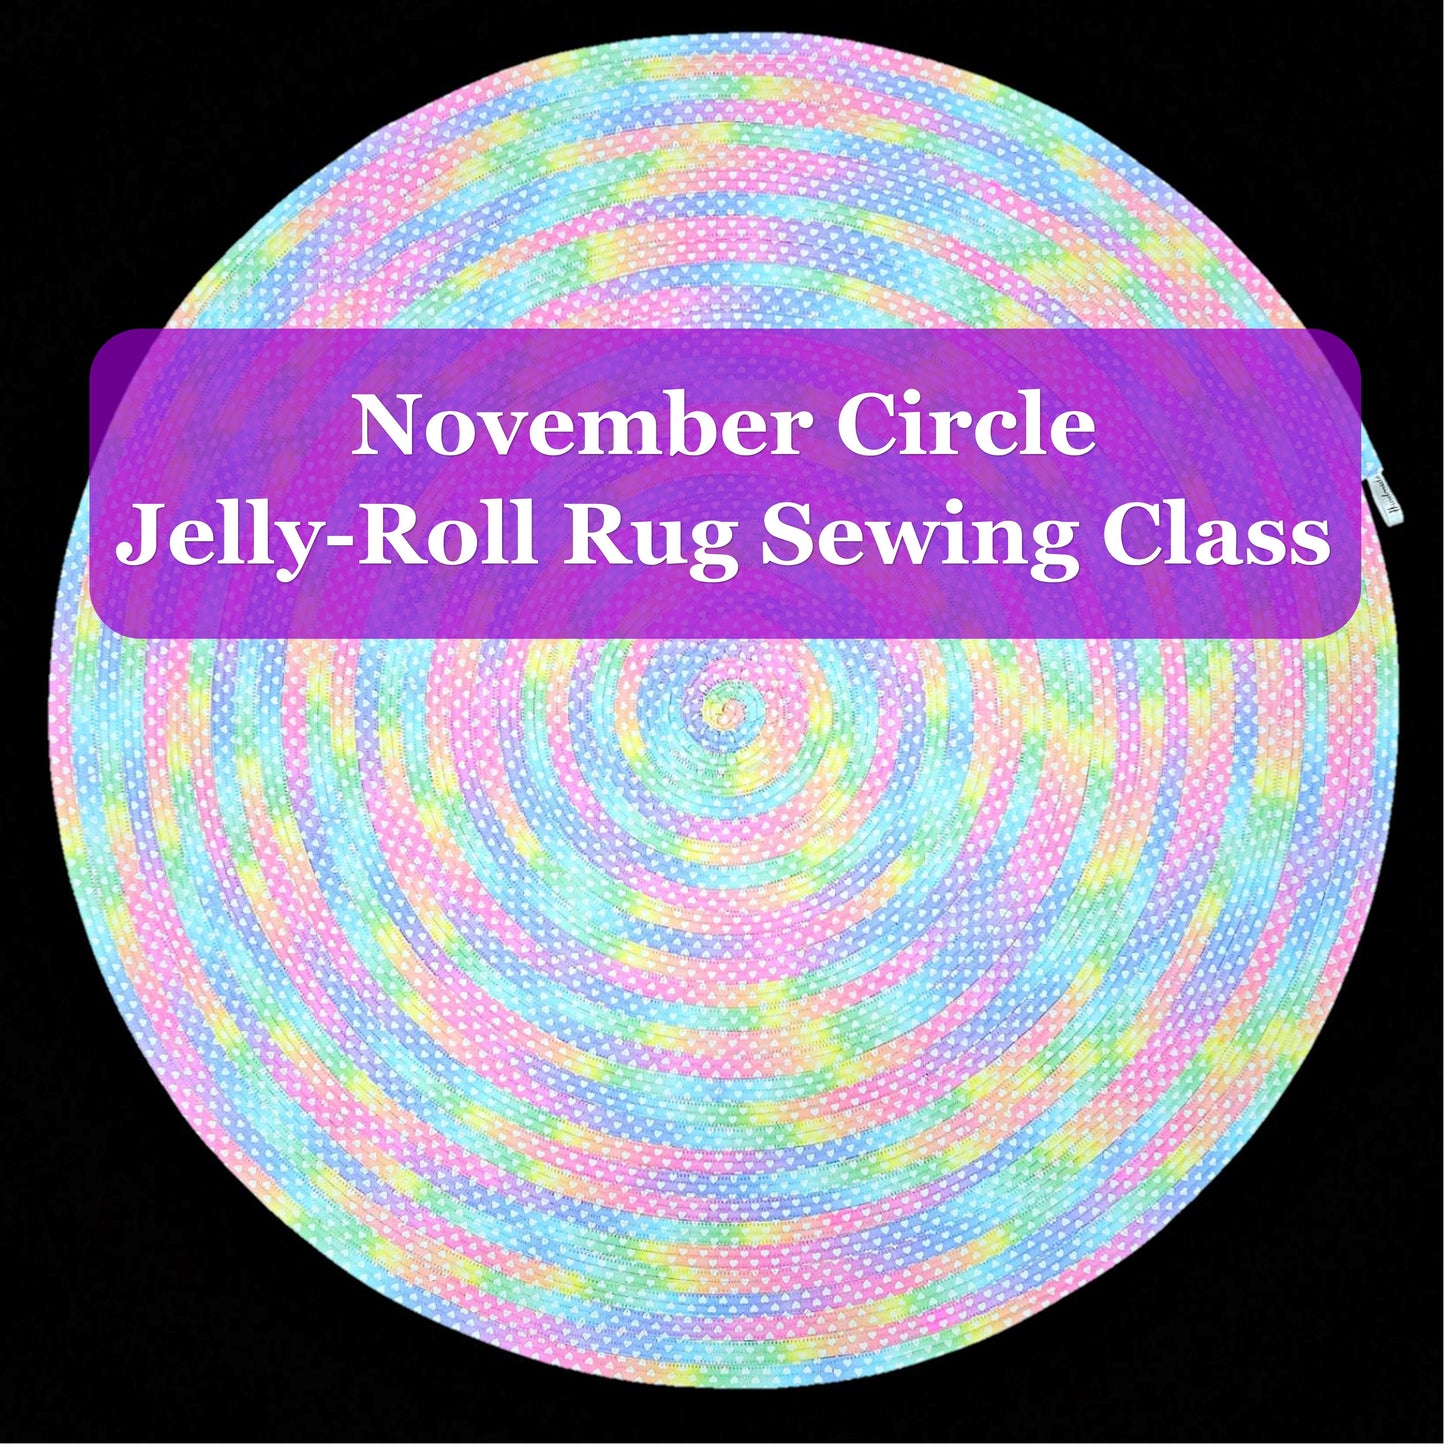 November Circle Jelly-Roll Rug Sewing Class